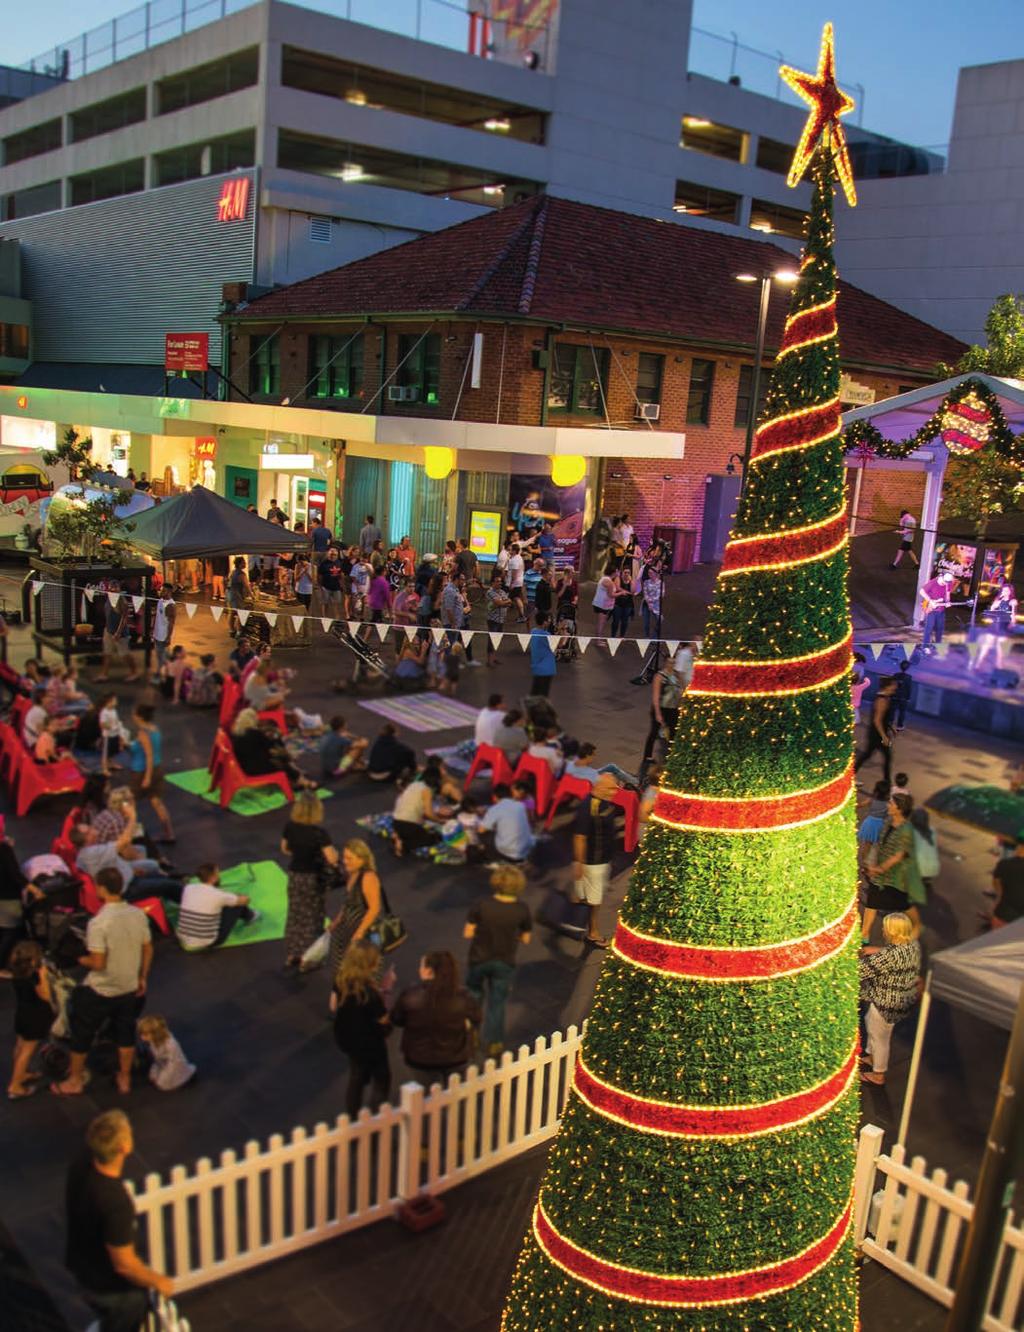 LIGHTING OF THE TREE THURSDAY 16 NOVEMBER 5-9PM Crown Street Mall Amphitheatre Stage Come join us for the